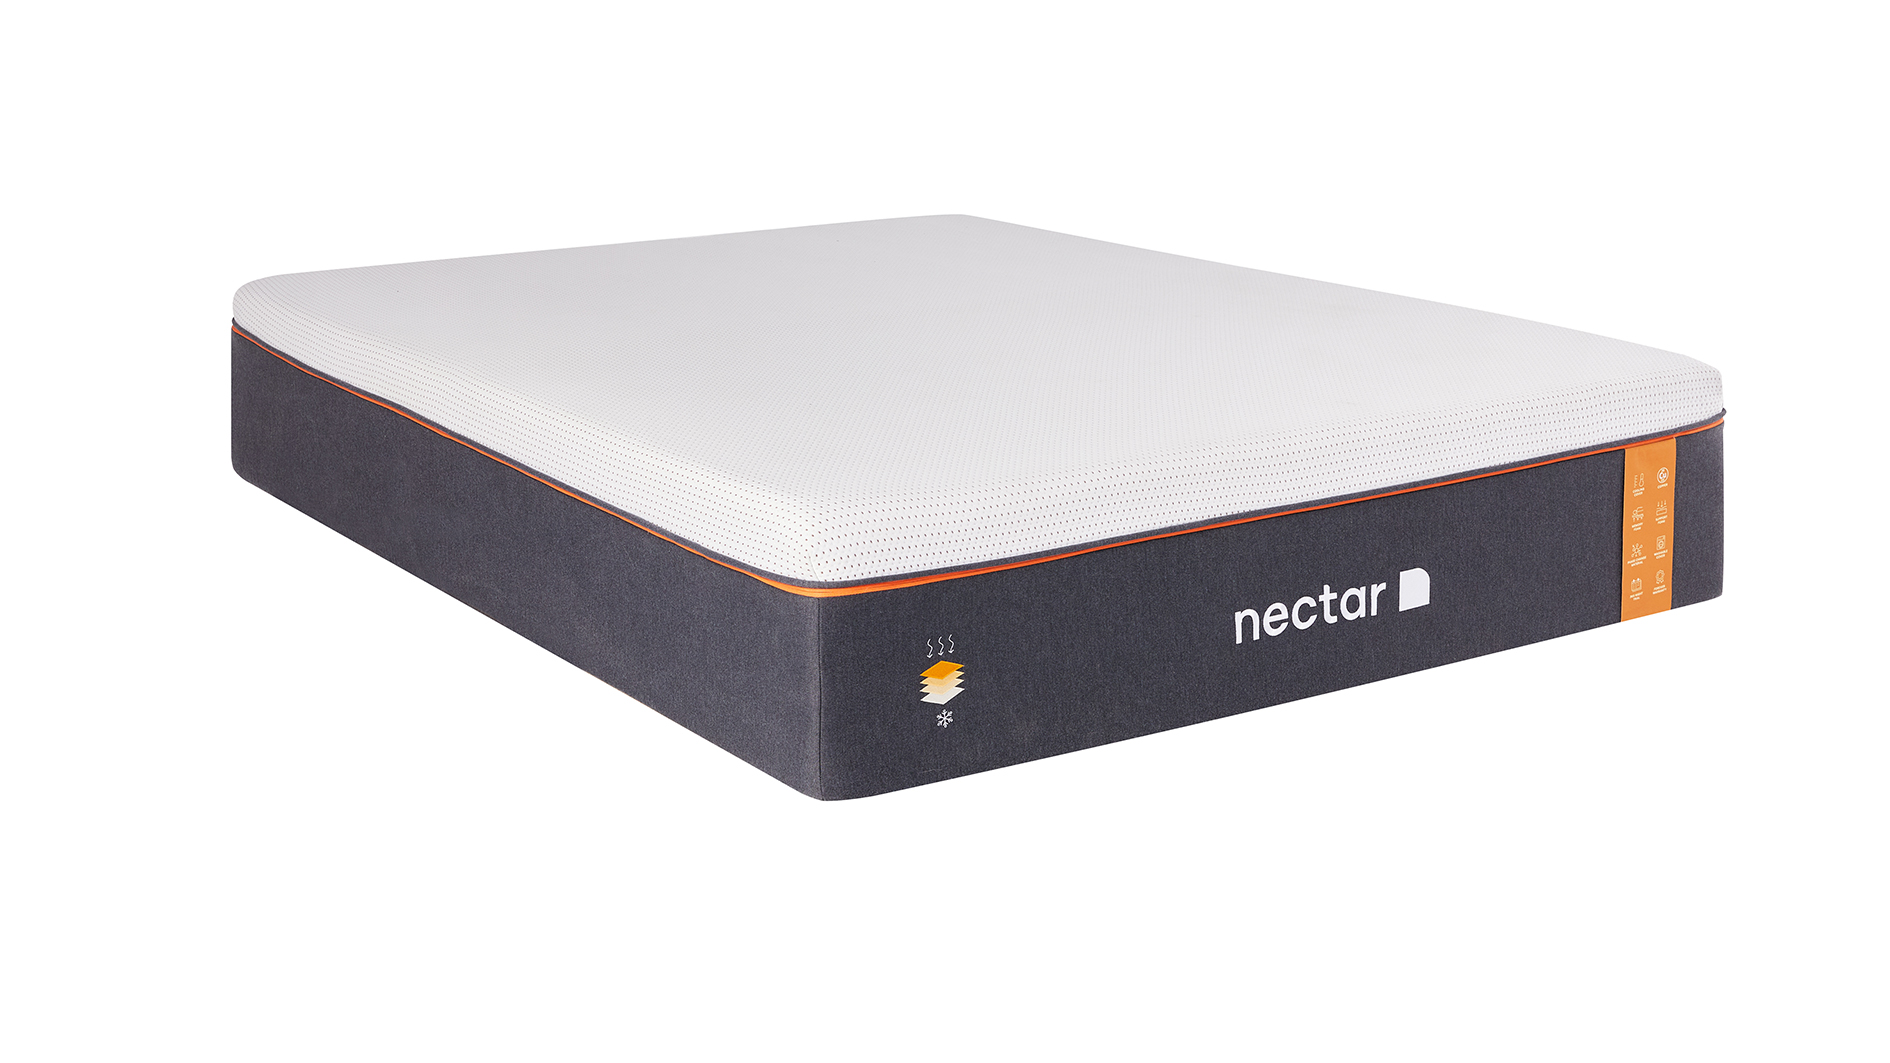 Nectar Premier Copper Mattress review: an image showing the mattress with its white top and dark brown base